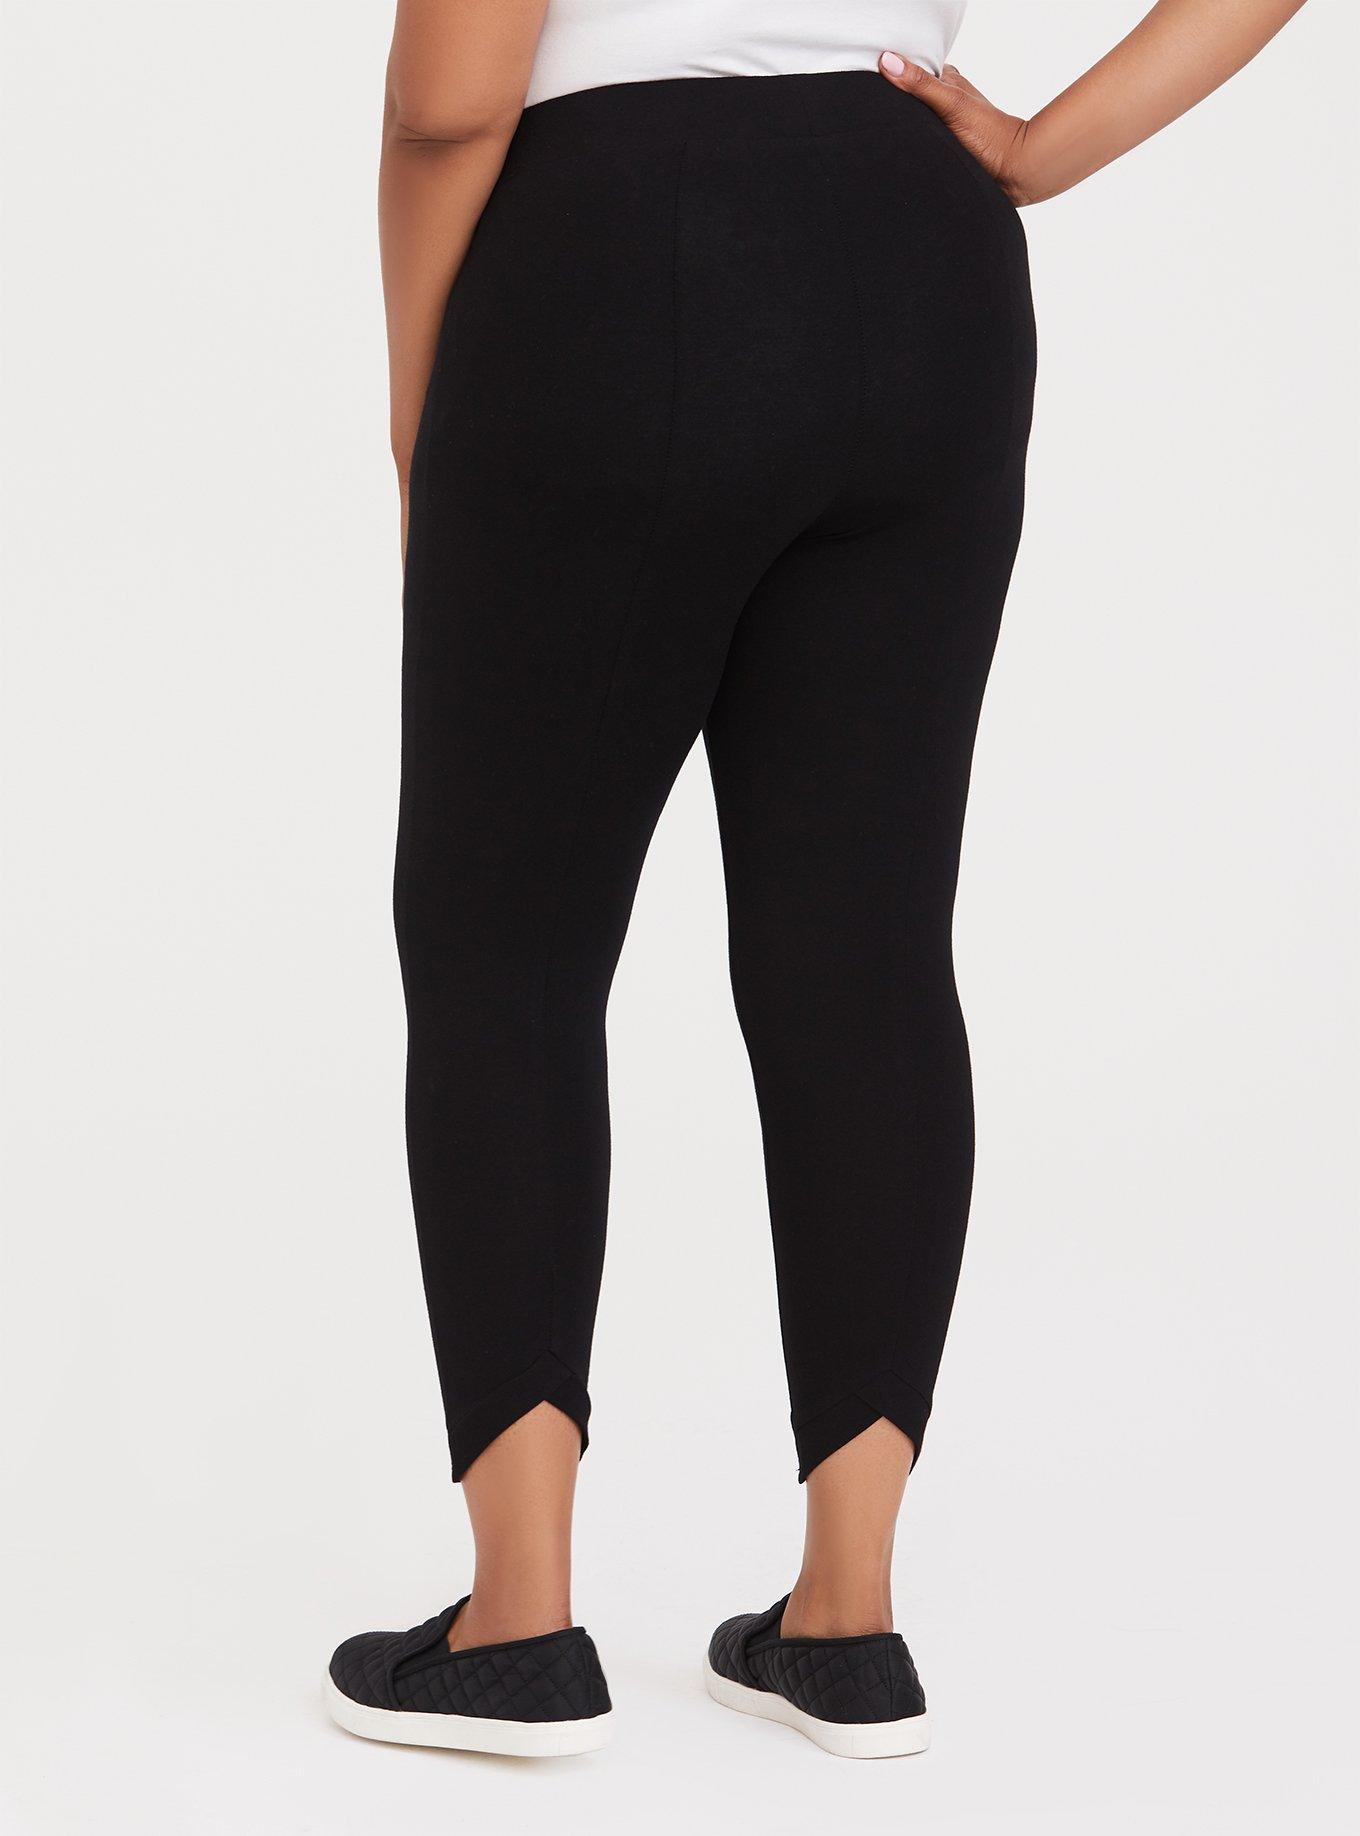 New Cuts Plus Size , All Sizes Womens Black Legging and Tights Plus Size  and Regular Size Rocker Cut Leggings 